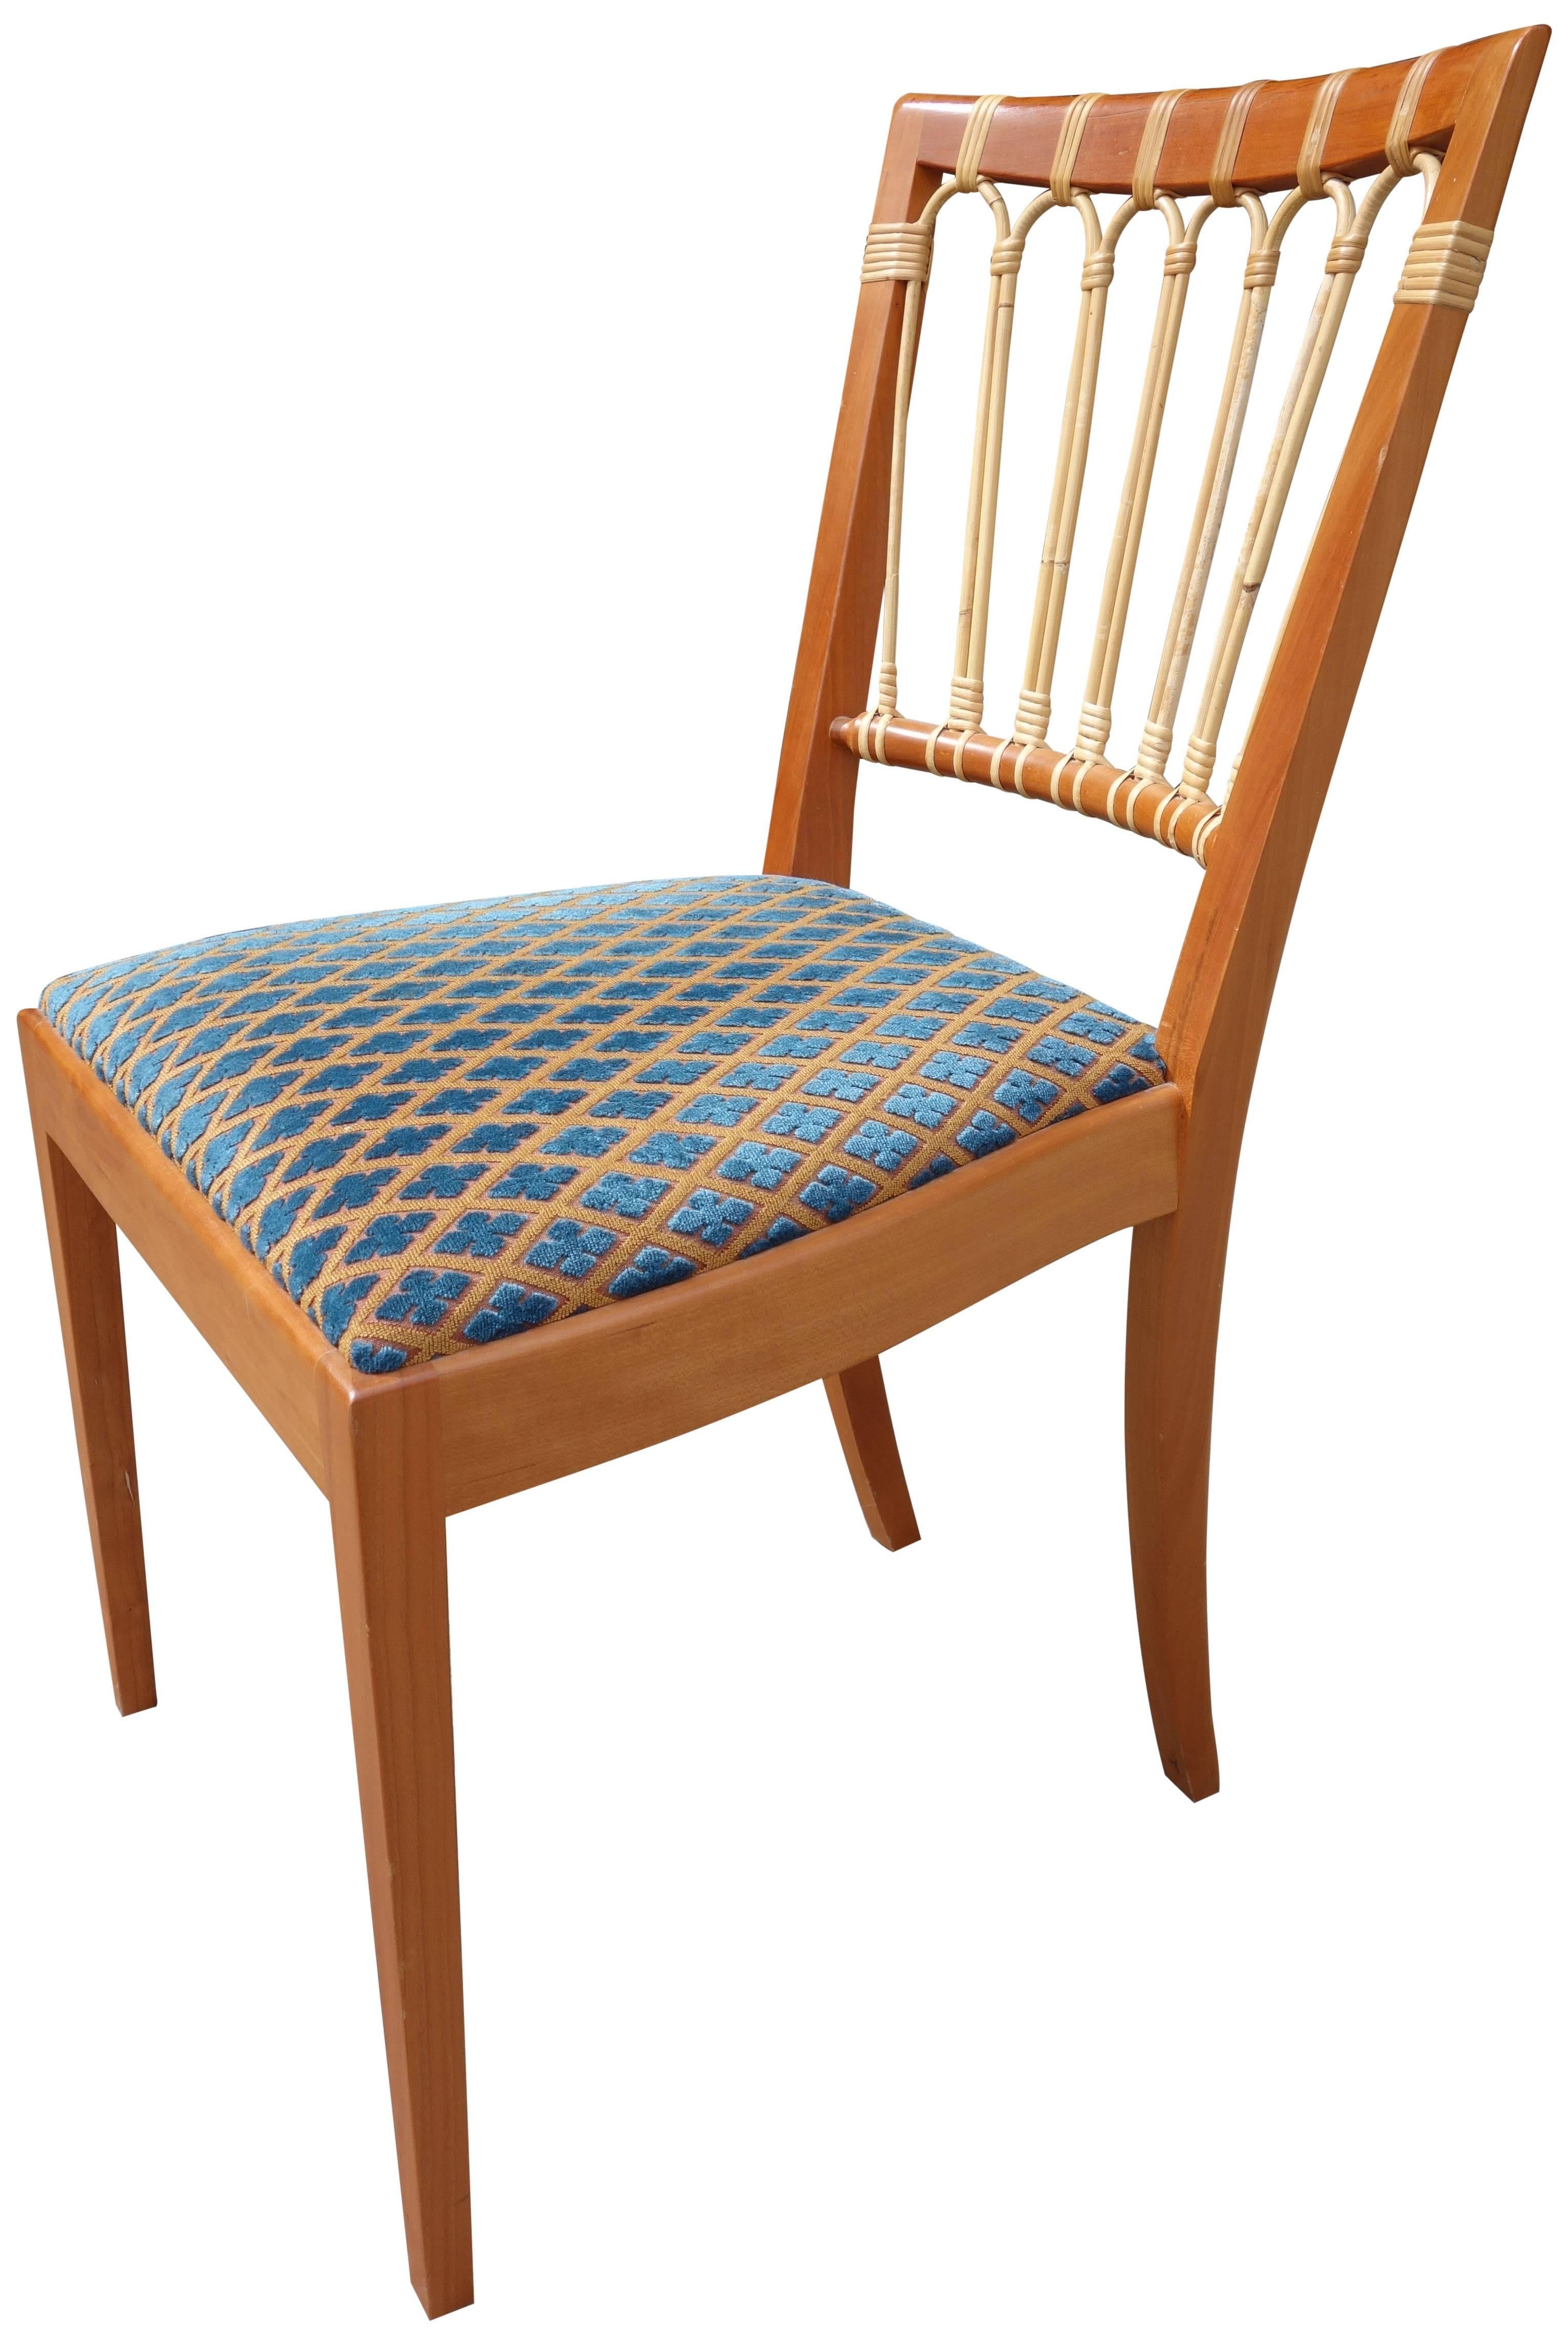 Exceptional model #1165 dining chairs have an openwork back of rattan on wood frame. Designed in 1947.
Original fabric and chairs are in very good condition.